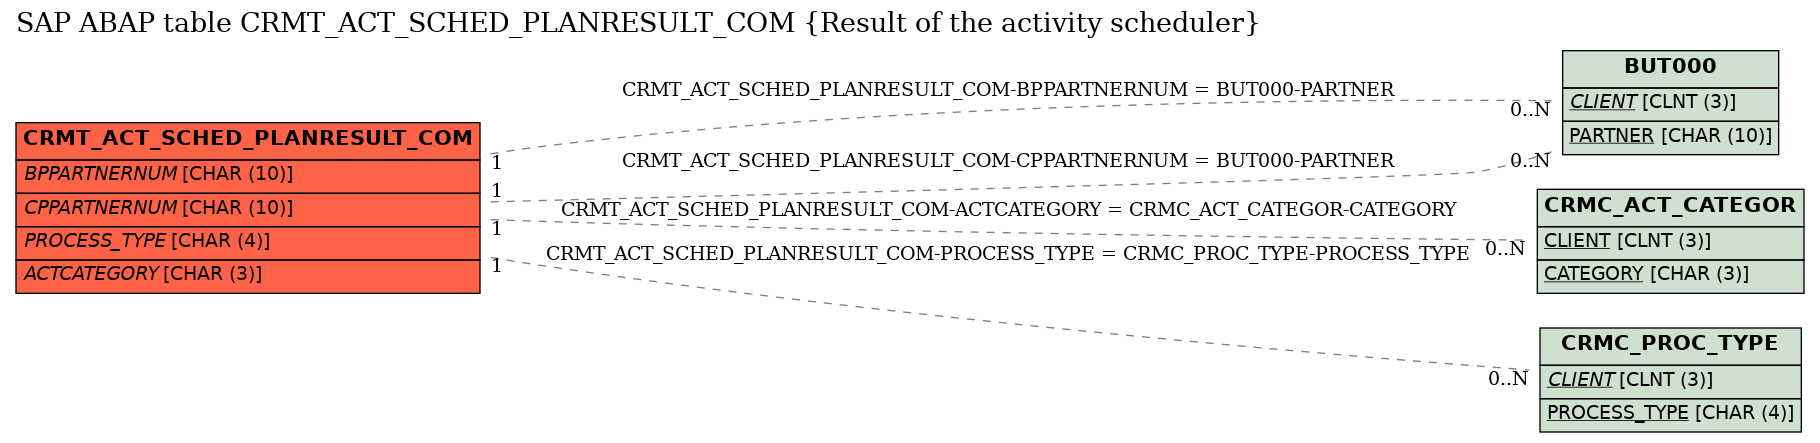 E-R Diagram for table CRMT_ACT_SCHED_PLANRESULT_COM (Result of the activity scheduler)